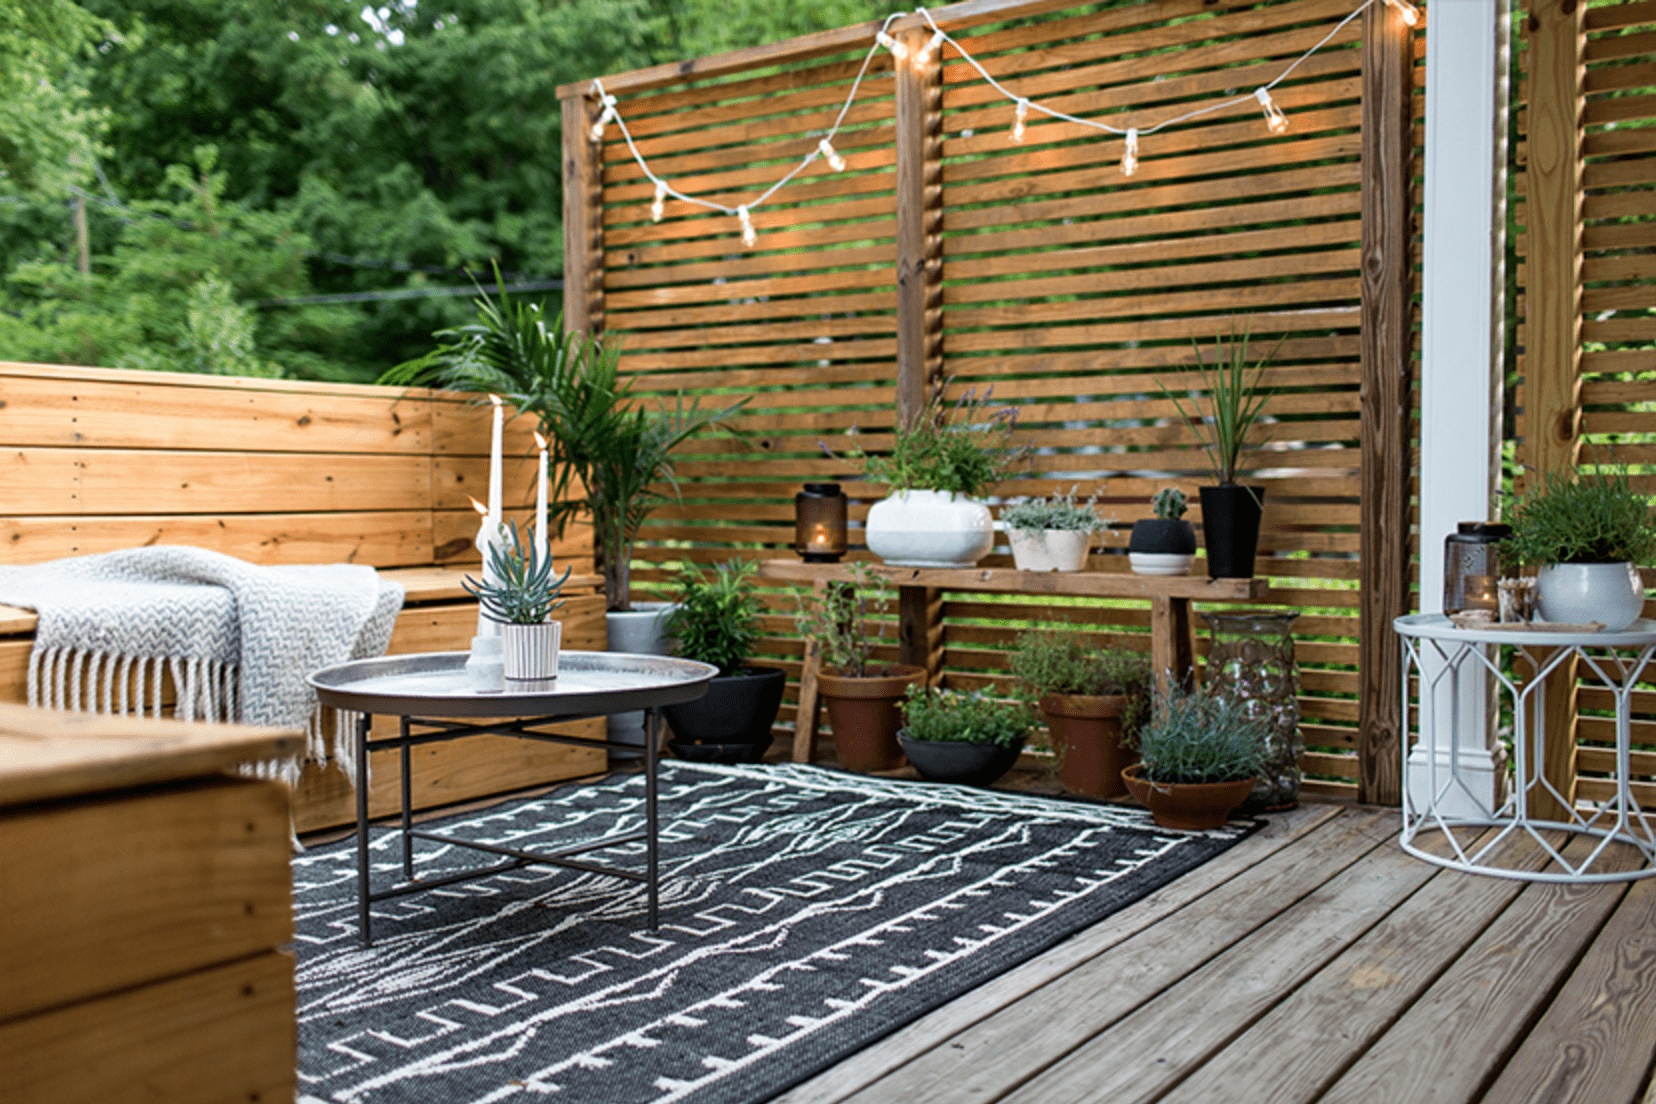 20 ideas for landscaping gardens and backyards with pallets - 135